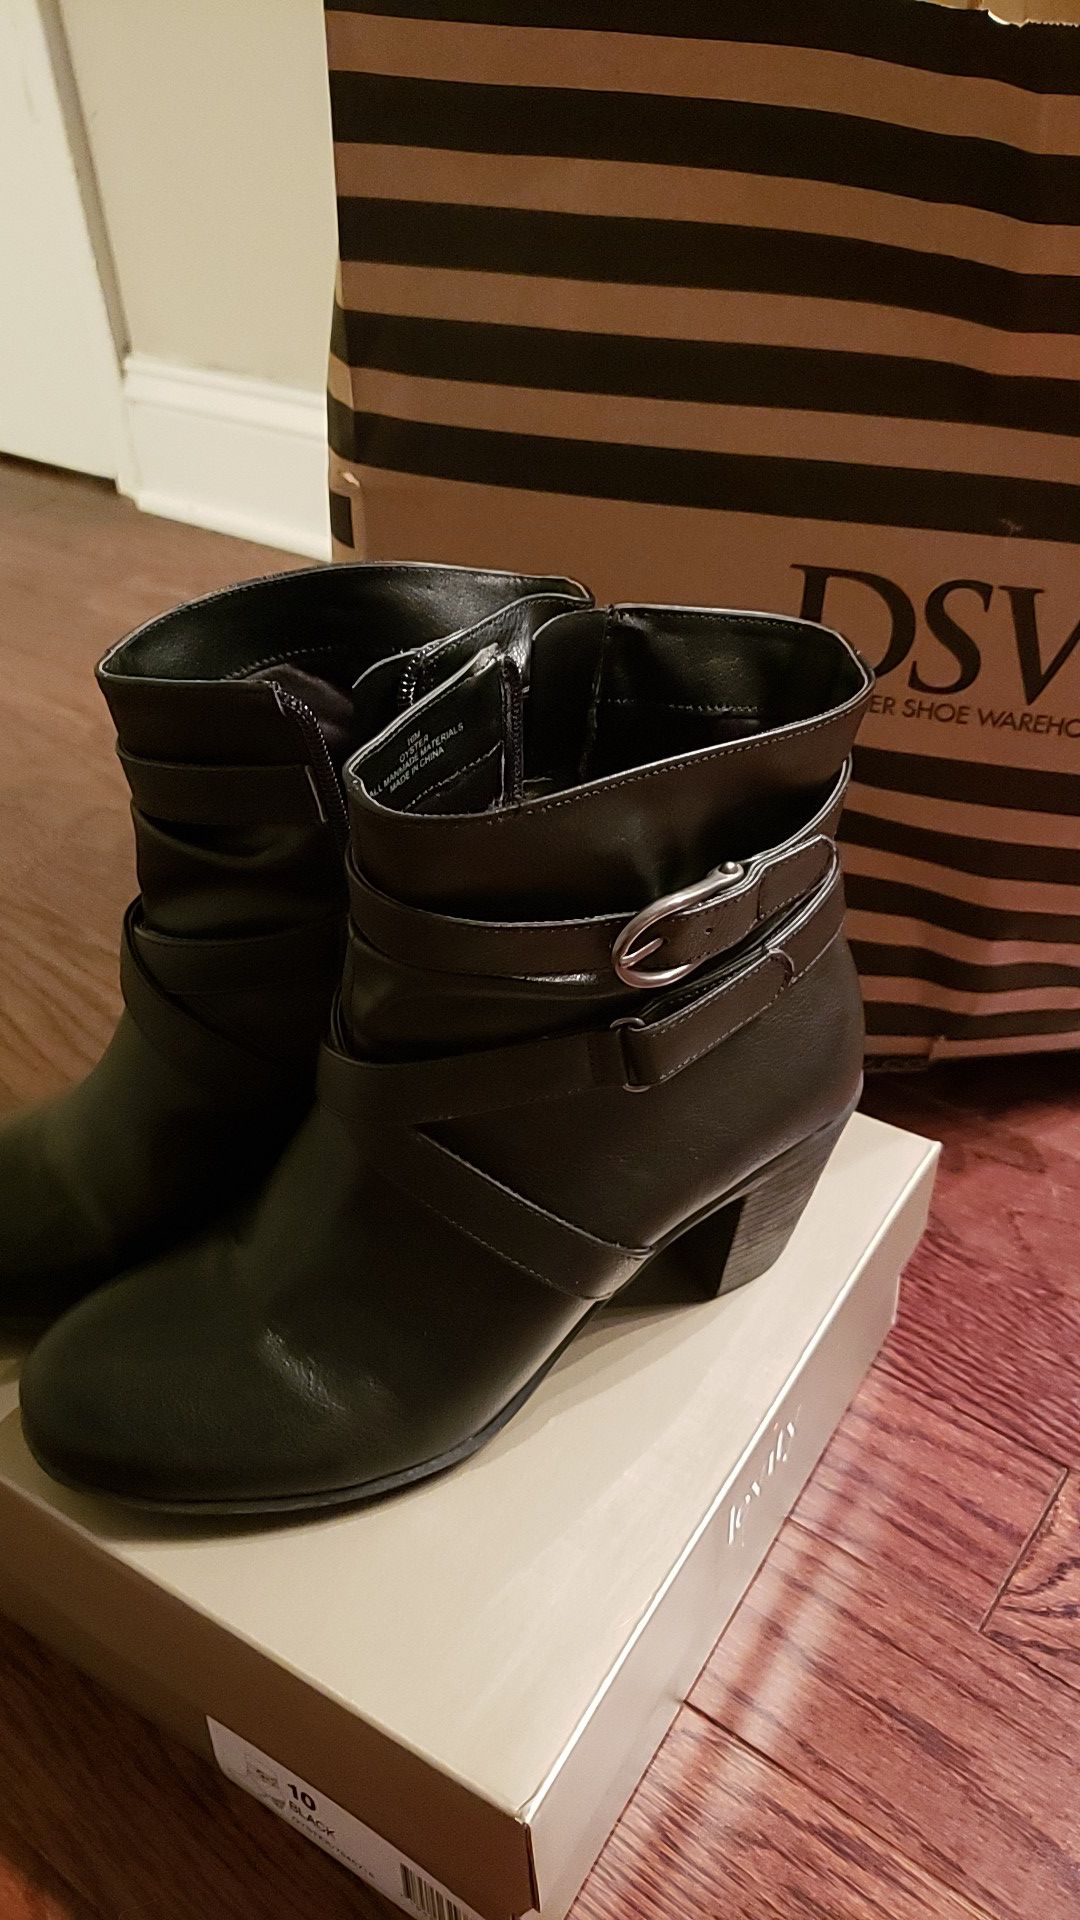 Levity Oyster booties